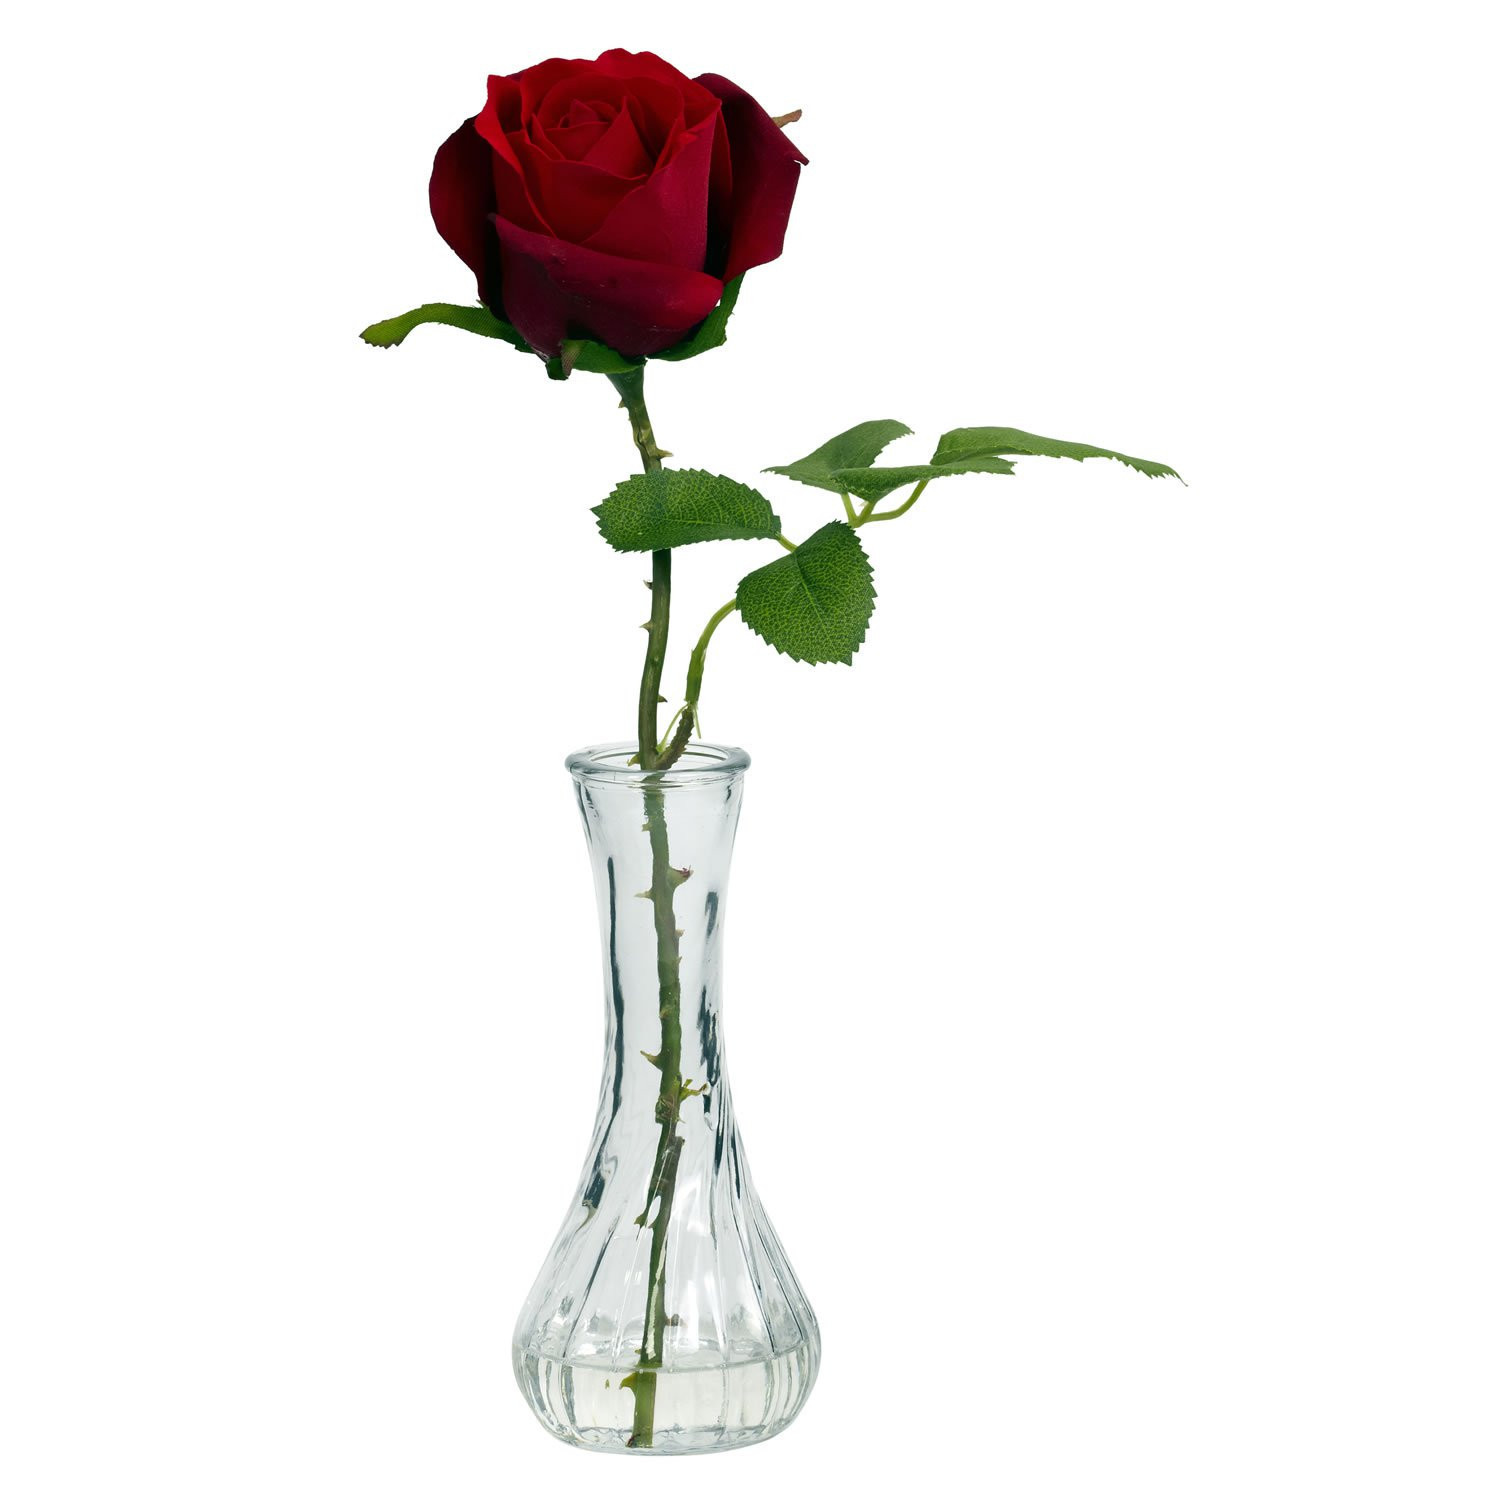 30 Lovable Teddy Bear Vase 2024 free download teddy bear vase of single rose vases pics roses red in a vase singleh vases rose single inside single rose vases photograph vase redh vases single rose in vasei 0d a red delivery scheme